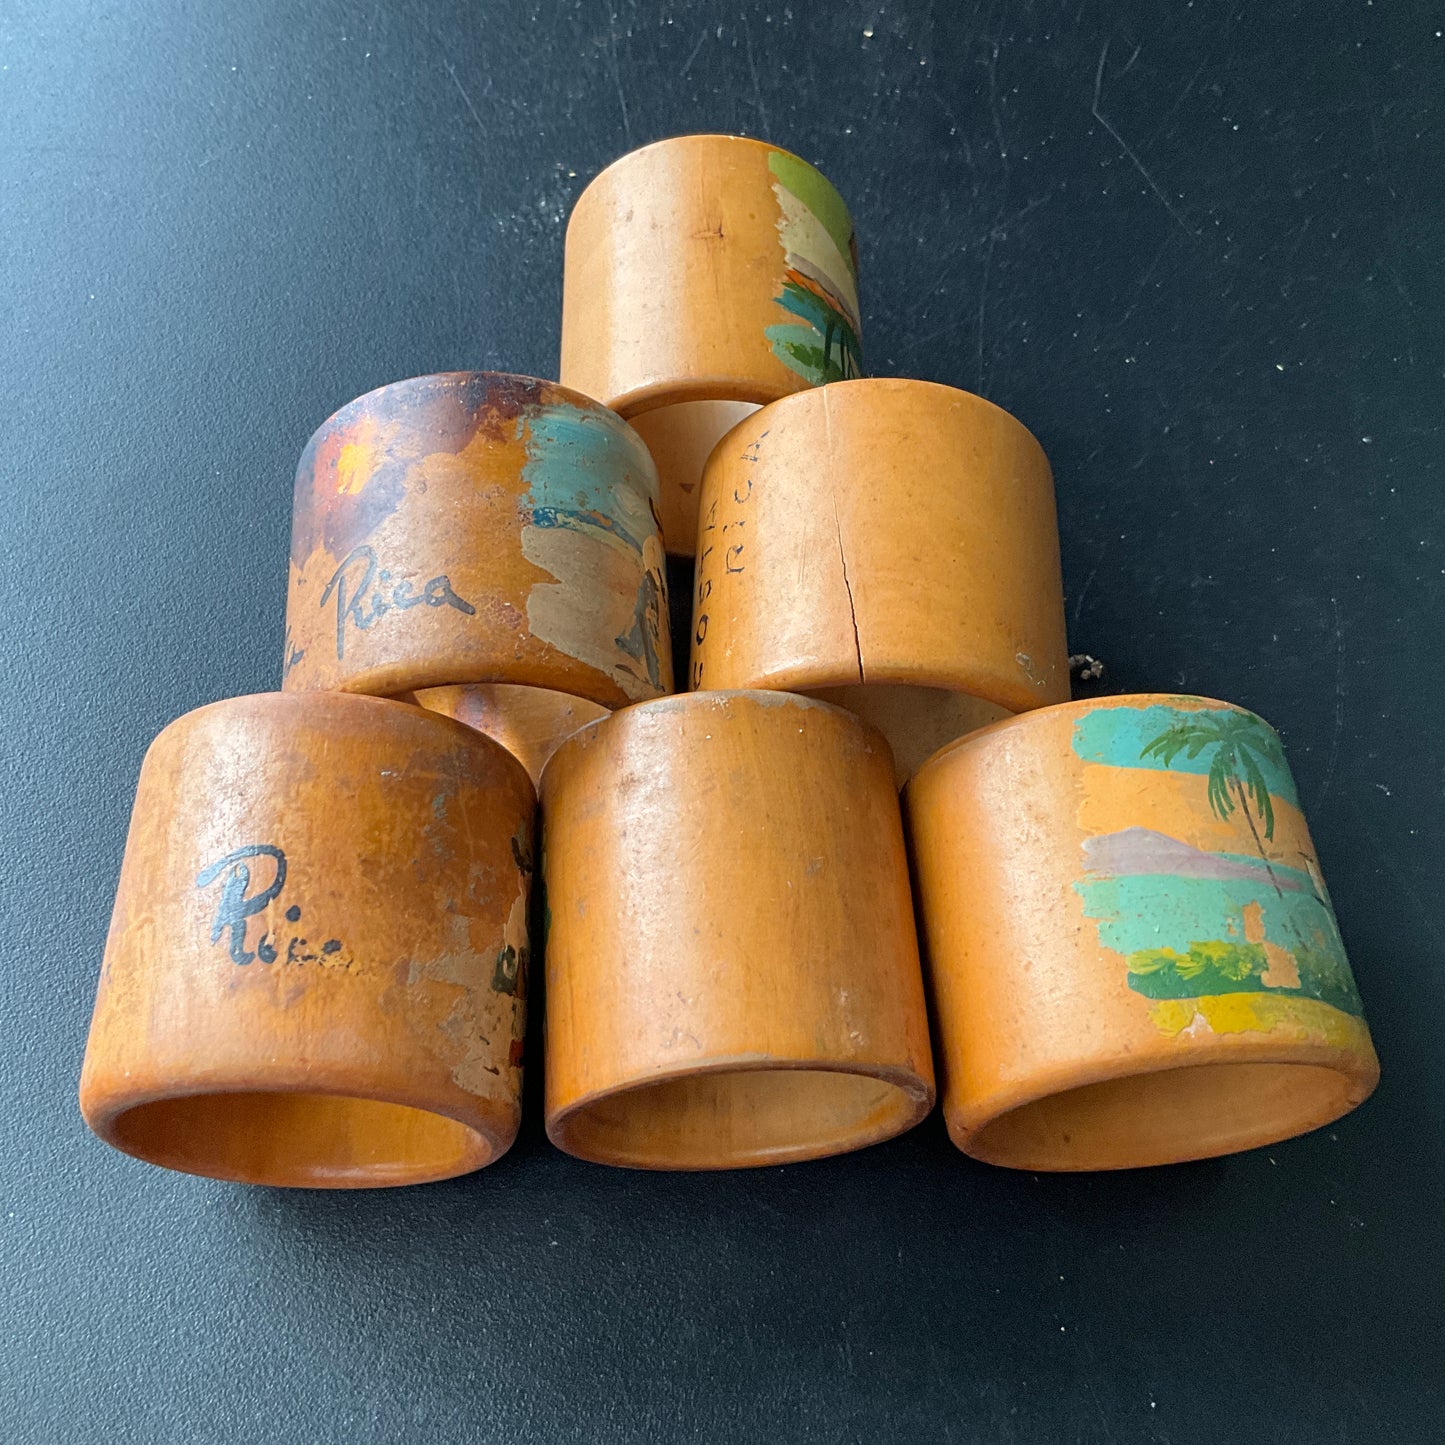 Costa Rican scenery hand painted on 6 wooden napkin rings souvenir collectible from Costa Rica